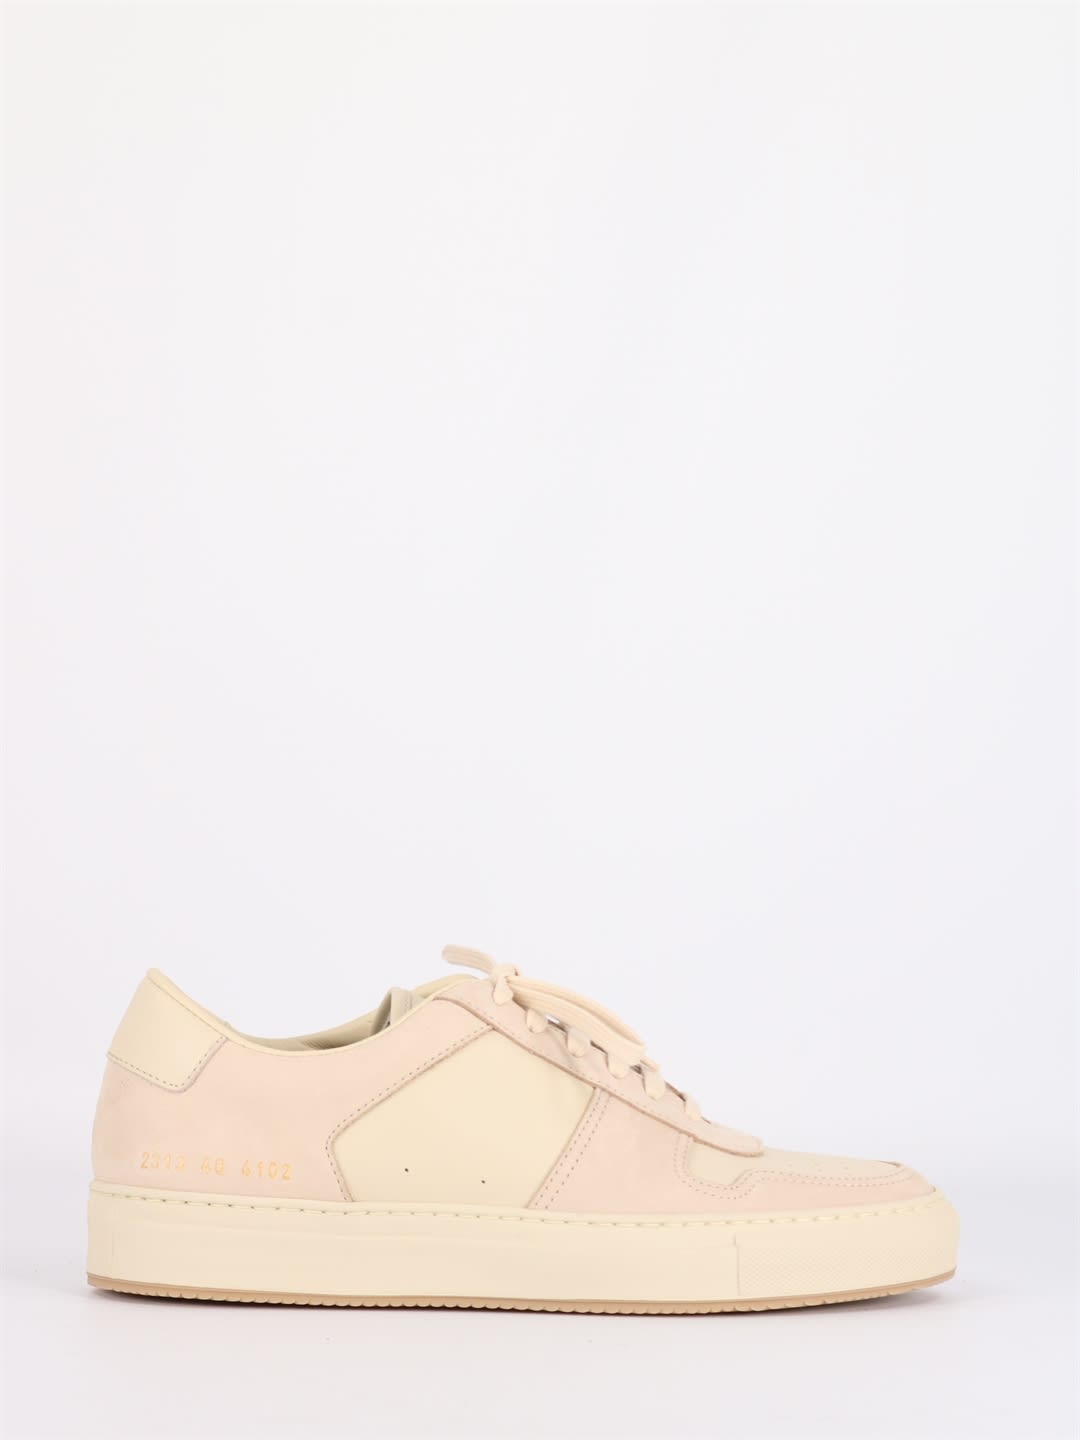 Common Projects Bbal Low Cream Sneakers